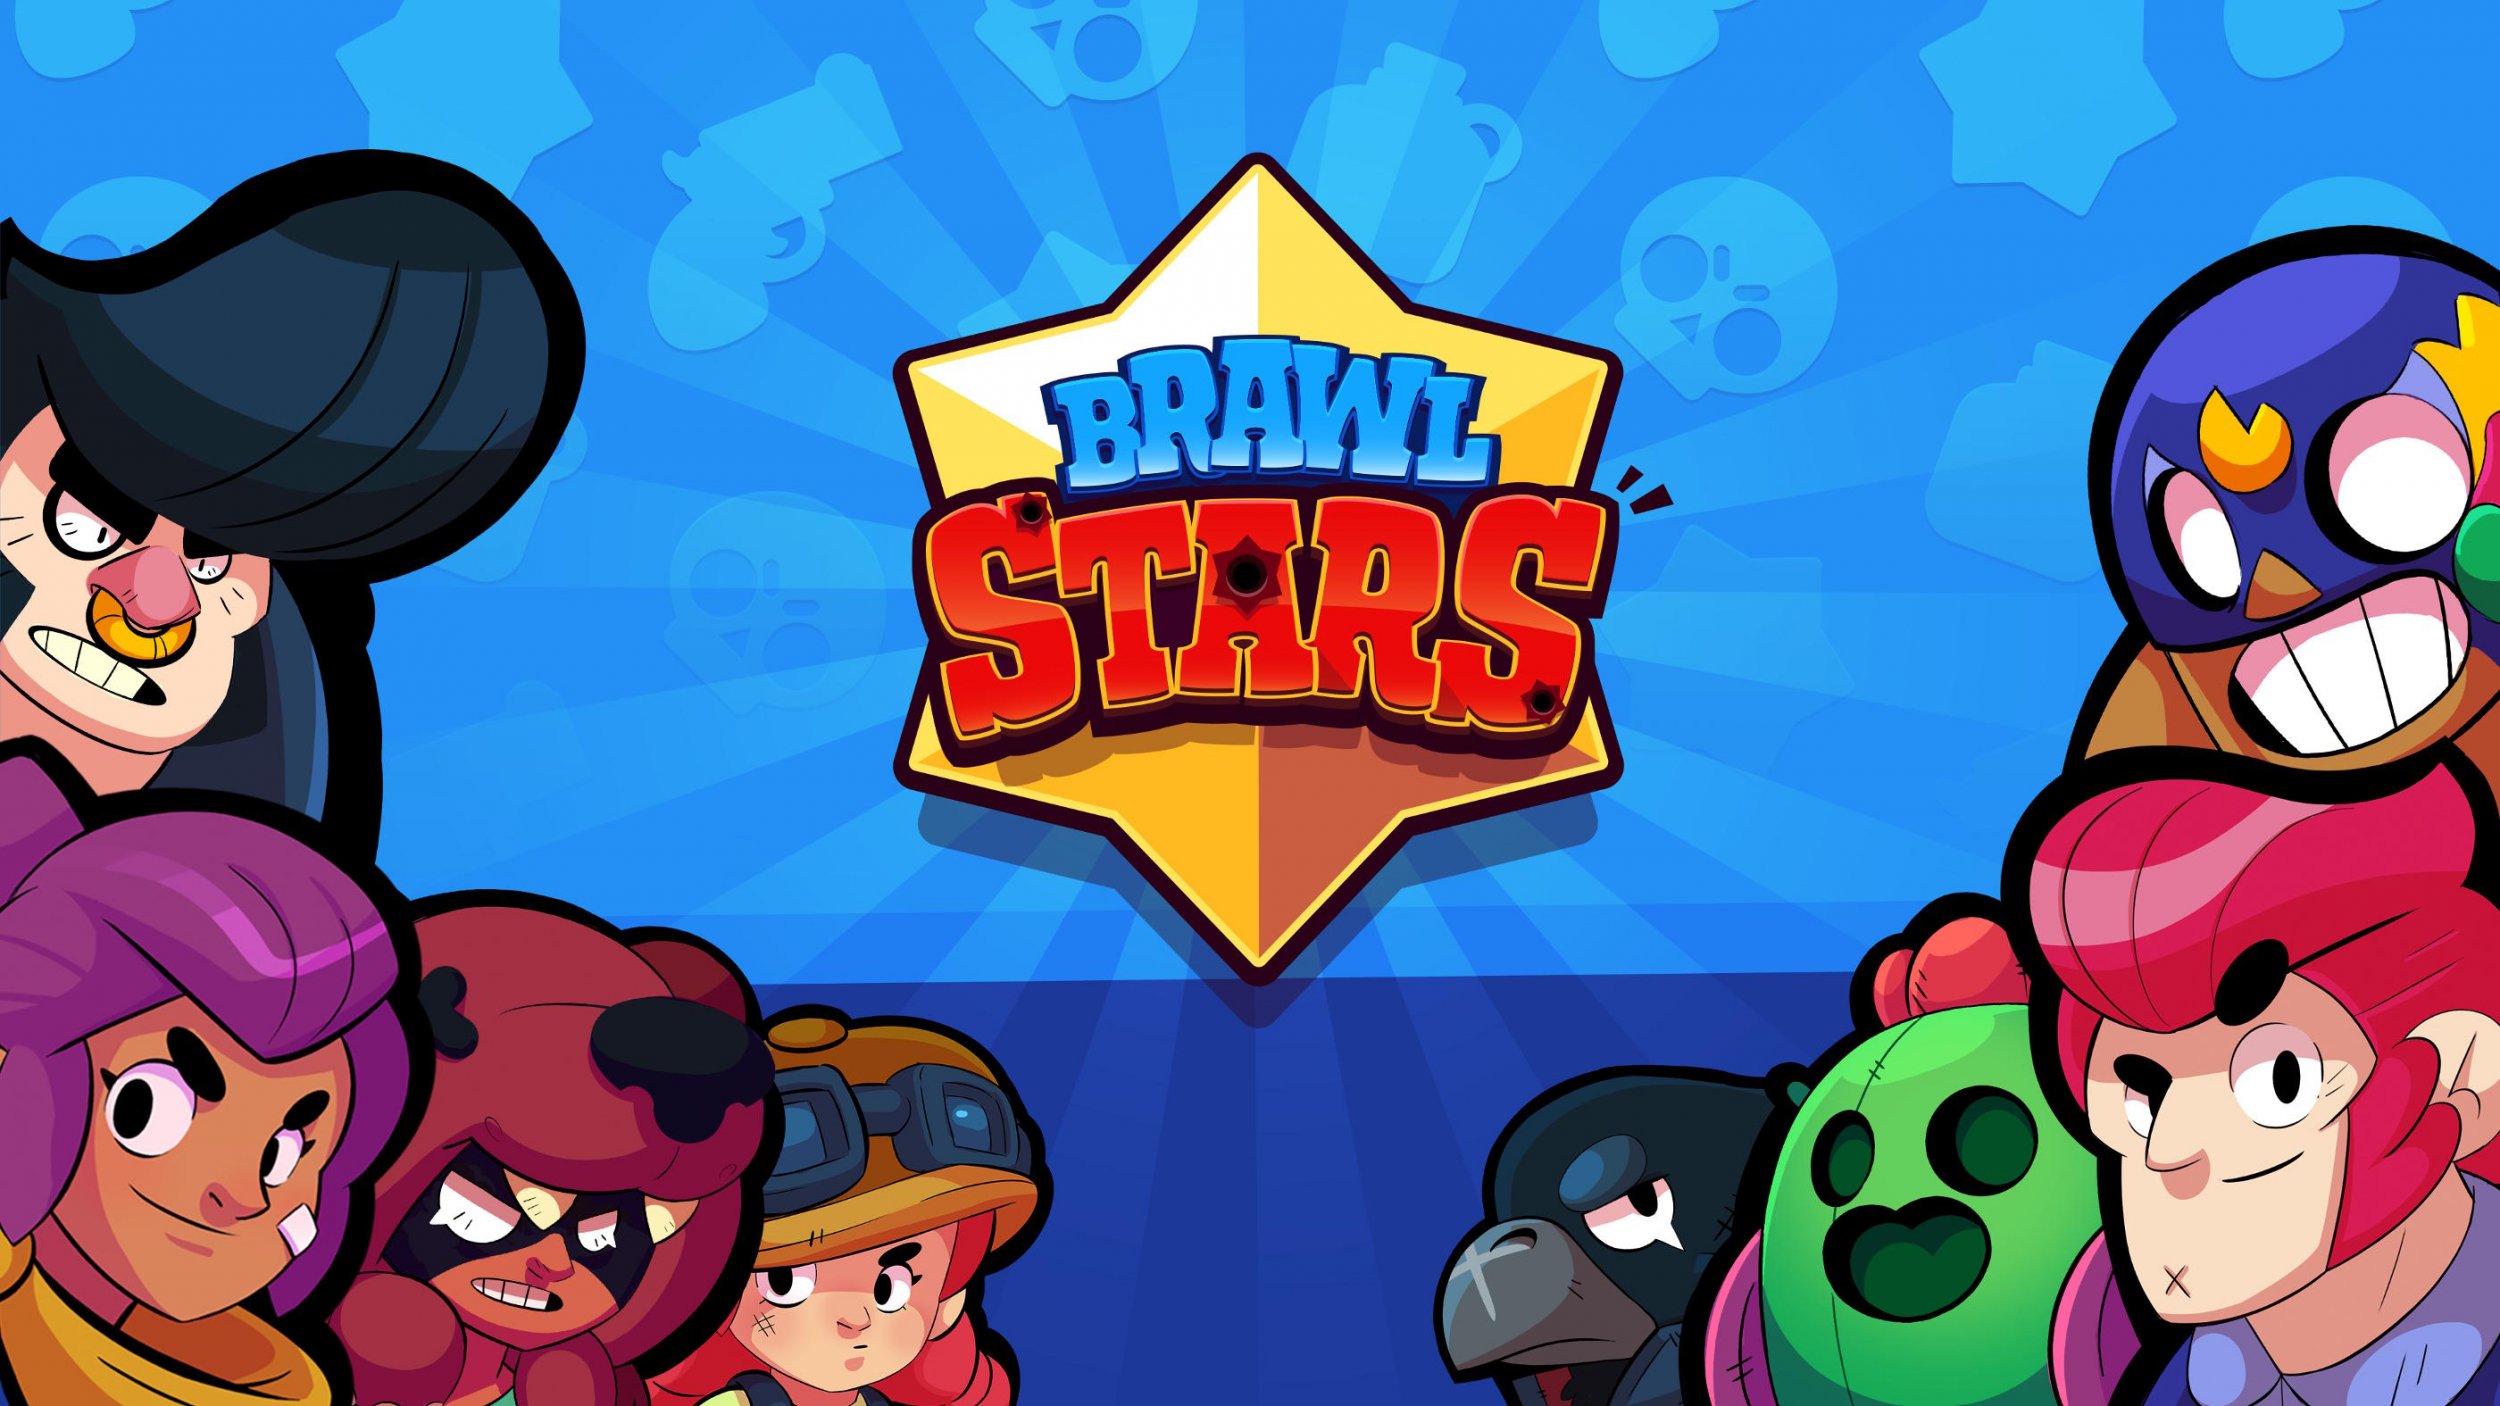 Brawl Stars Update New Upgrade System Landscape Mode And More - how many power points for level 9 brawl stars